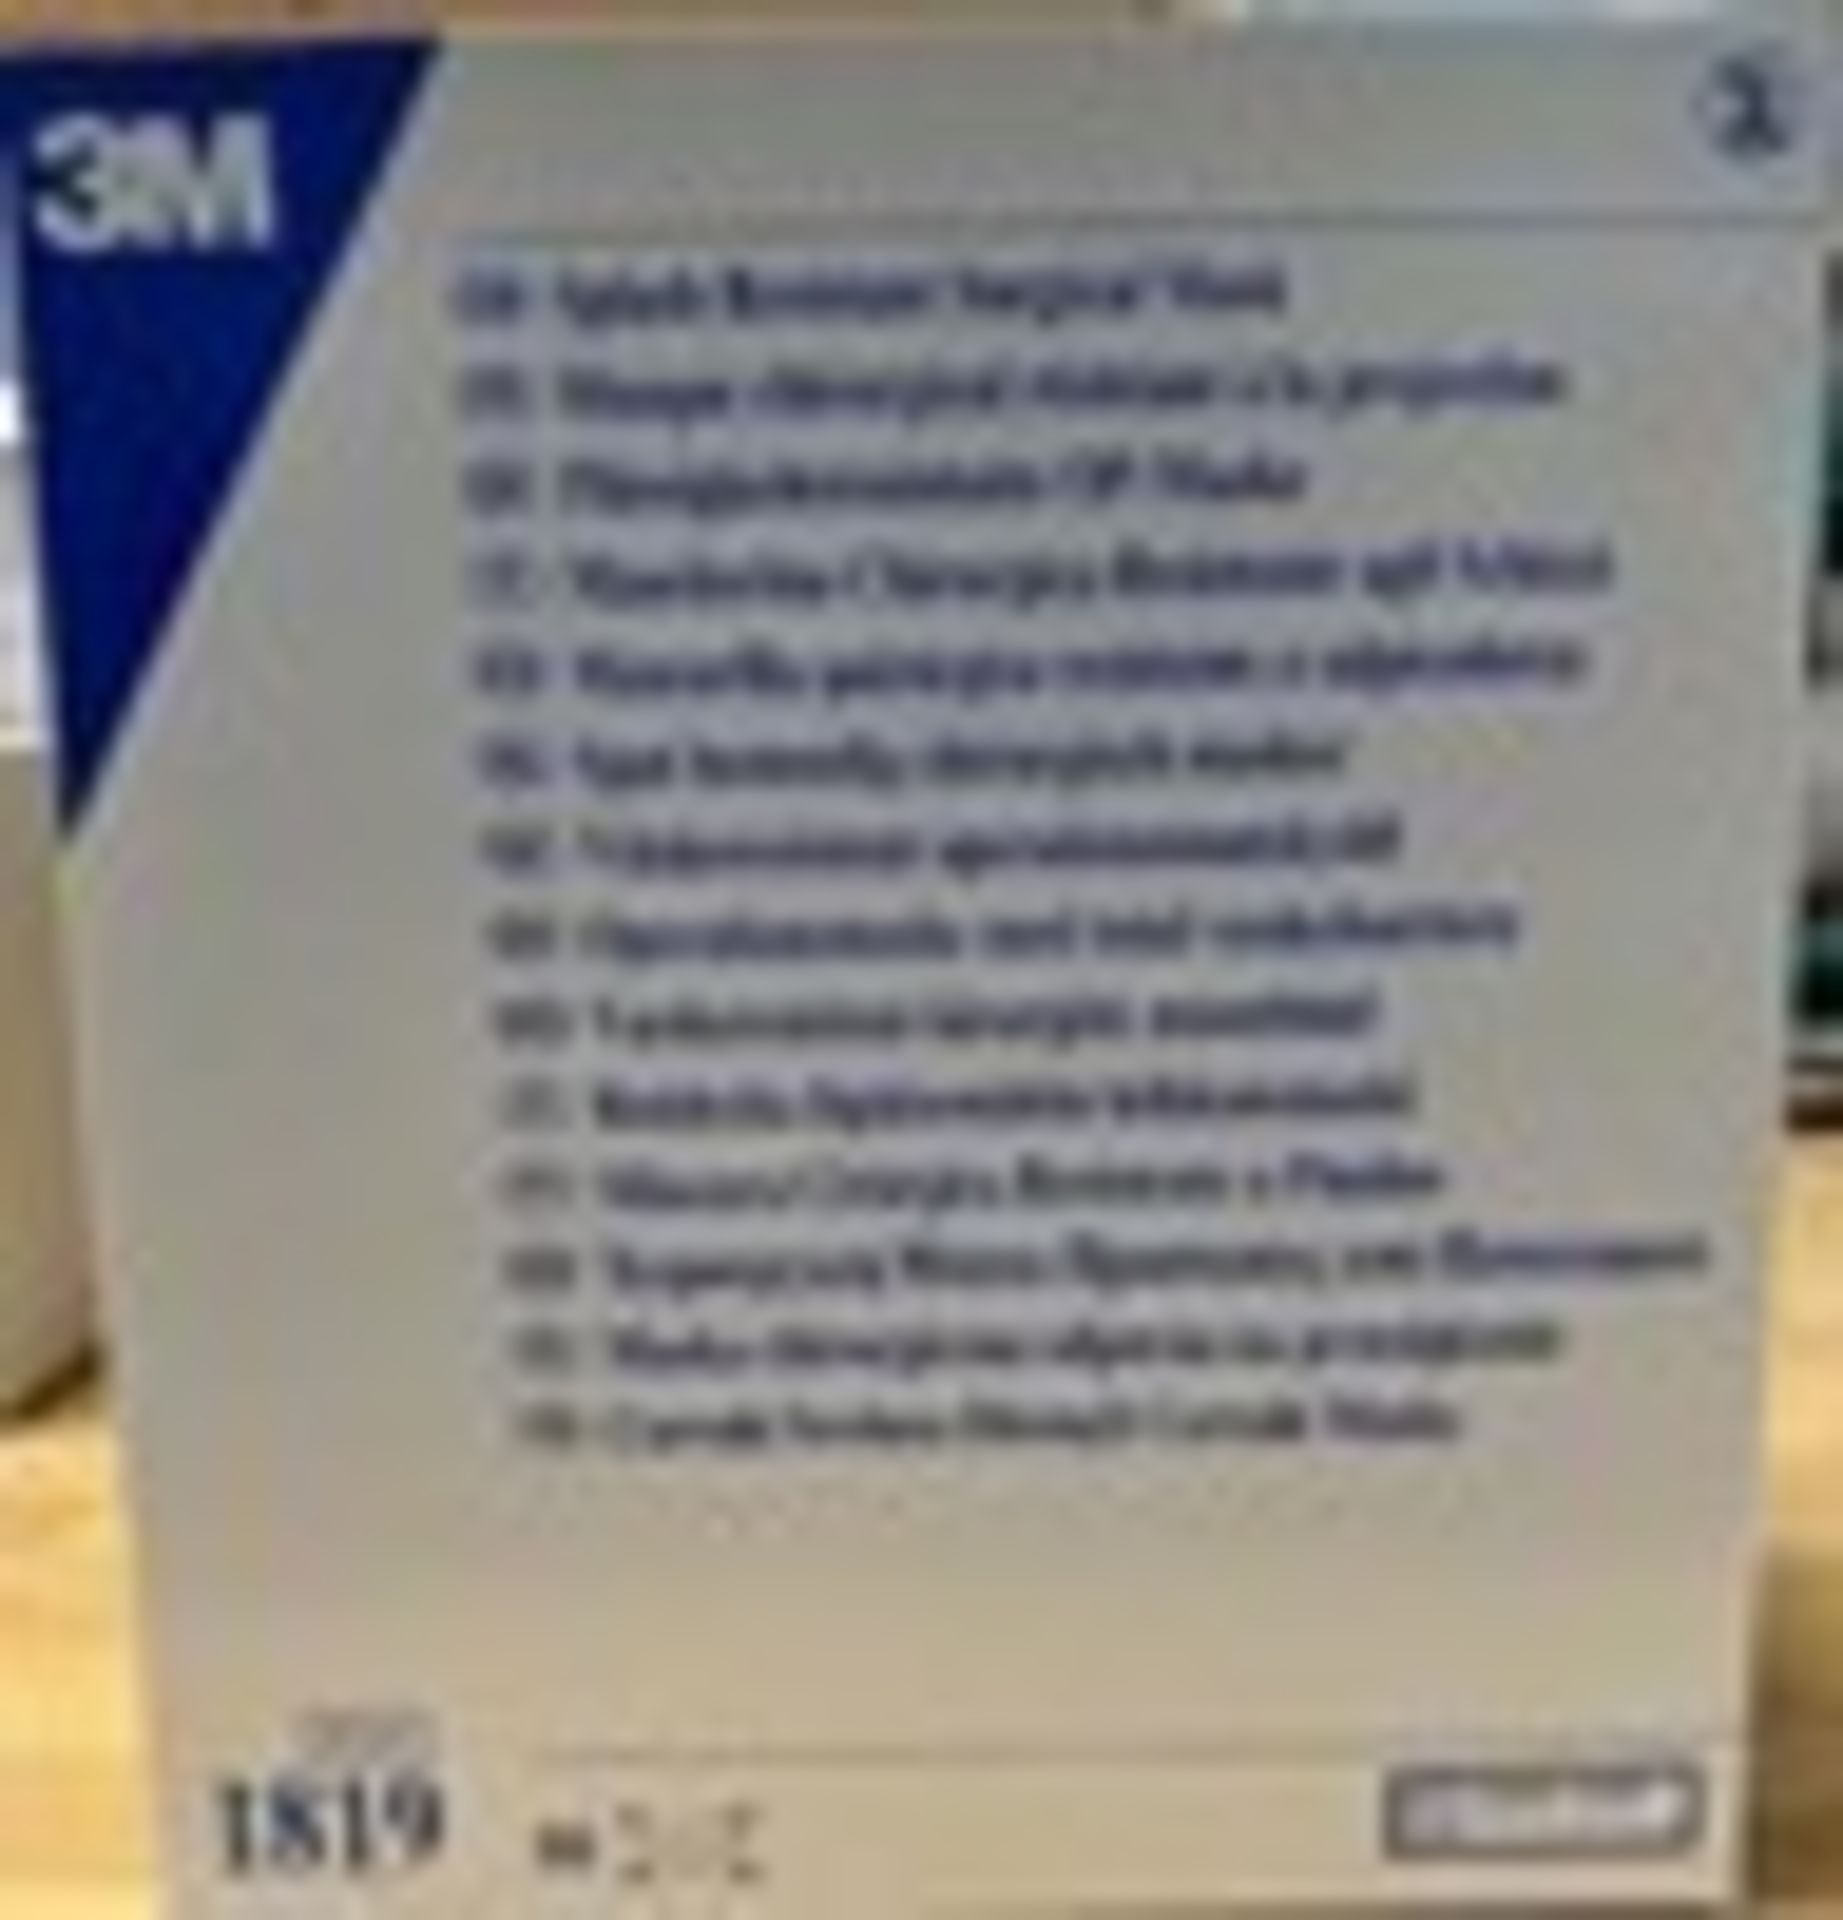 3M 1819 4PLY SURGICAL TIE-ON FACE MASK (80 Masks Per Box) - Image 2 of 2